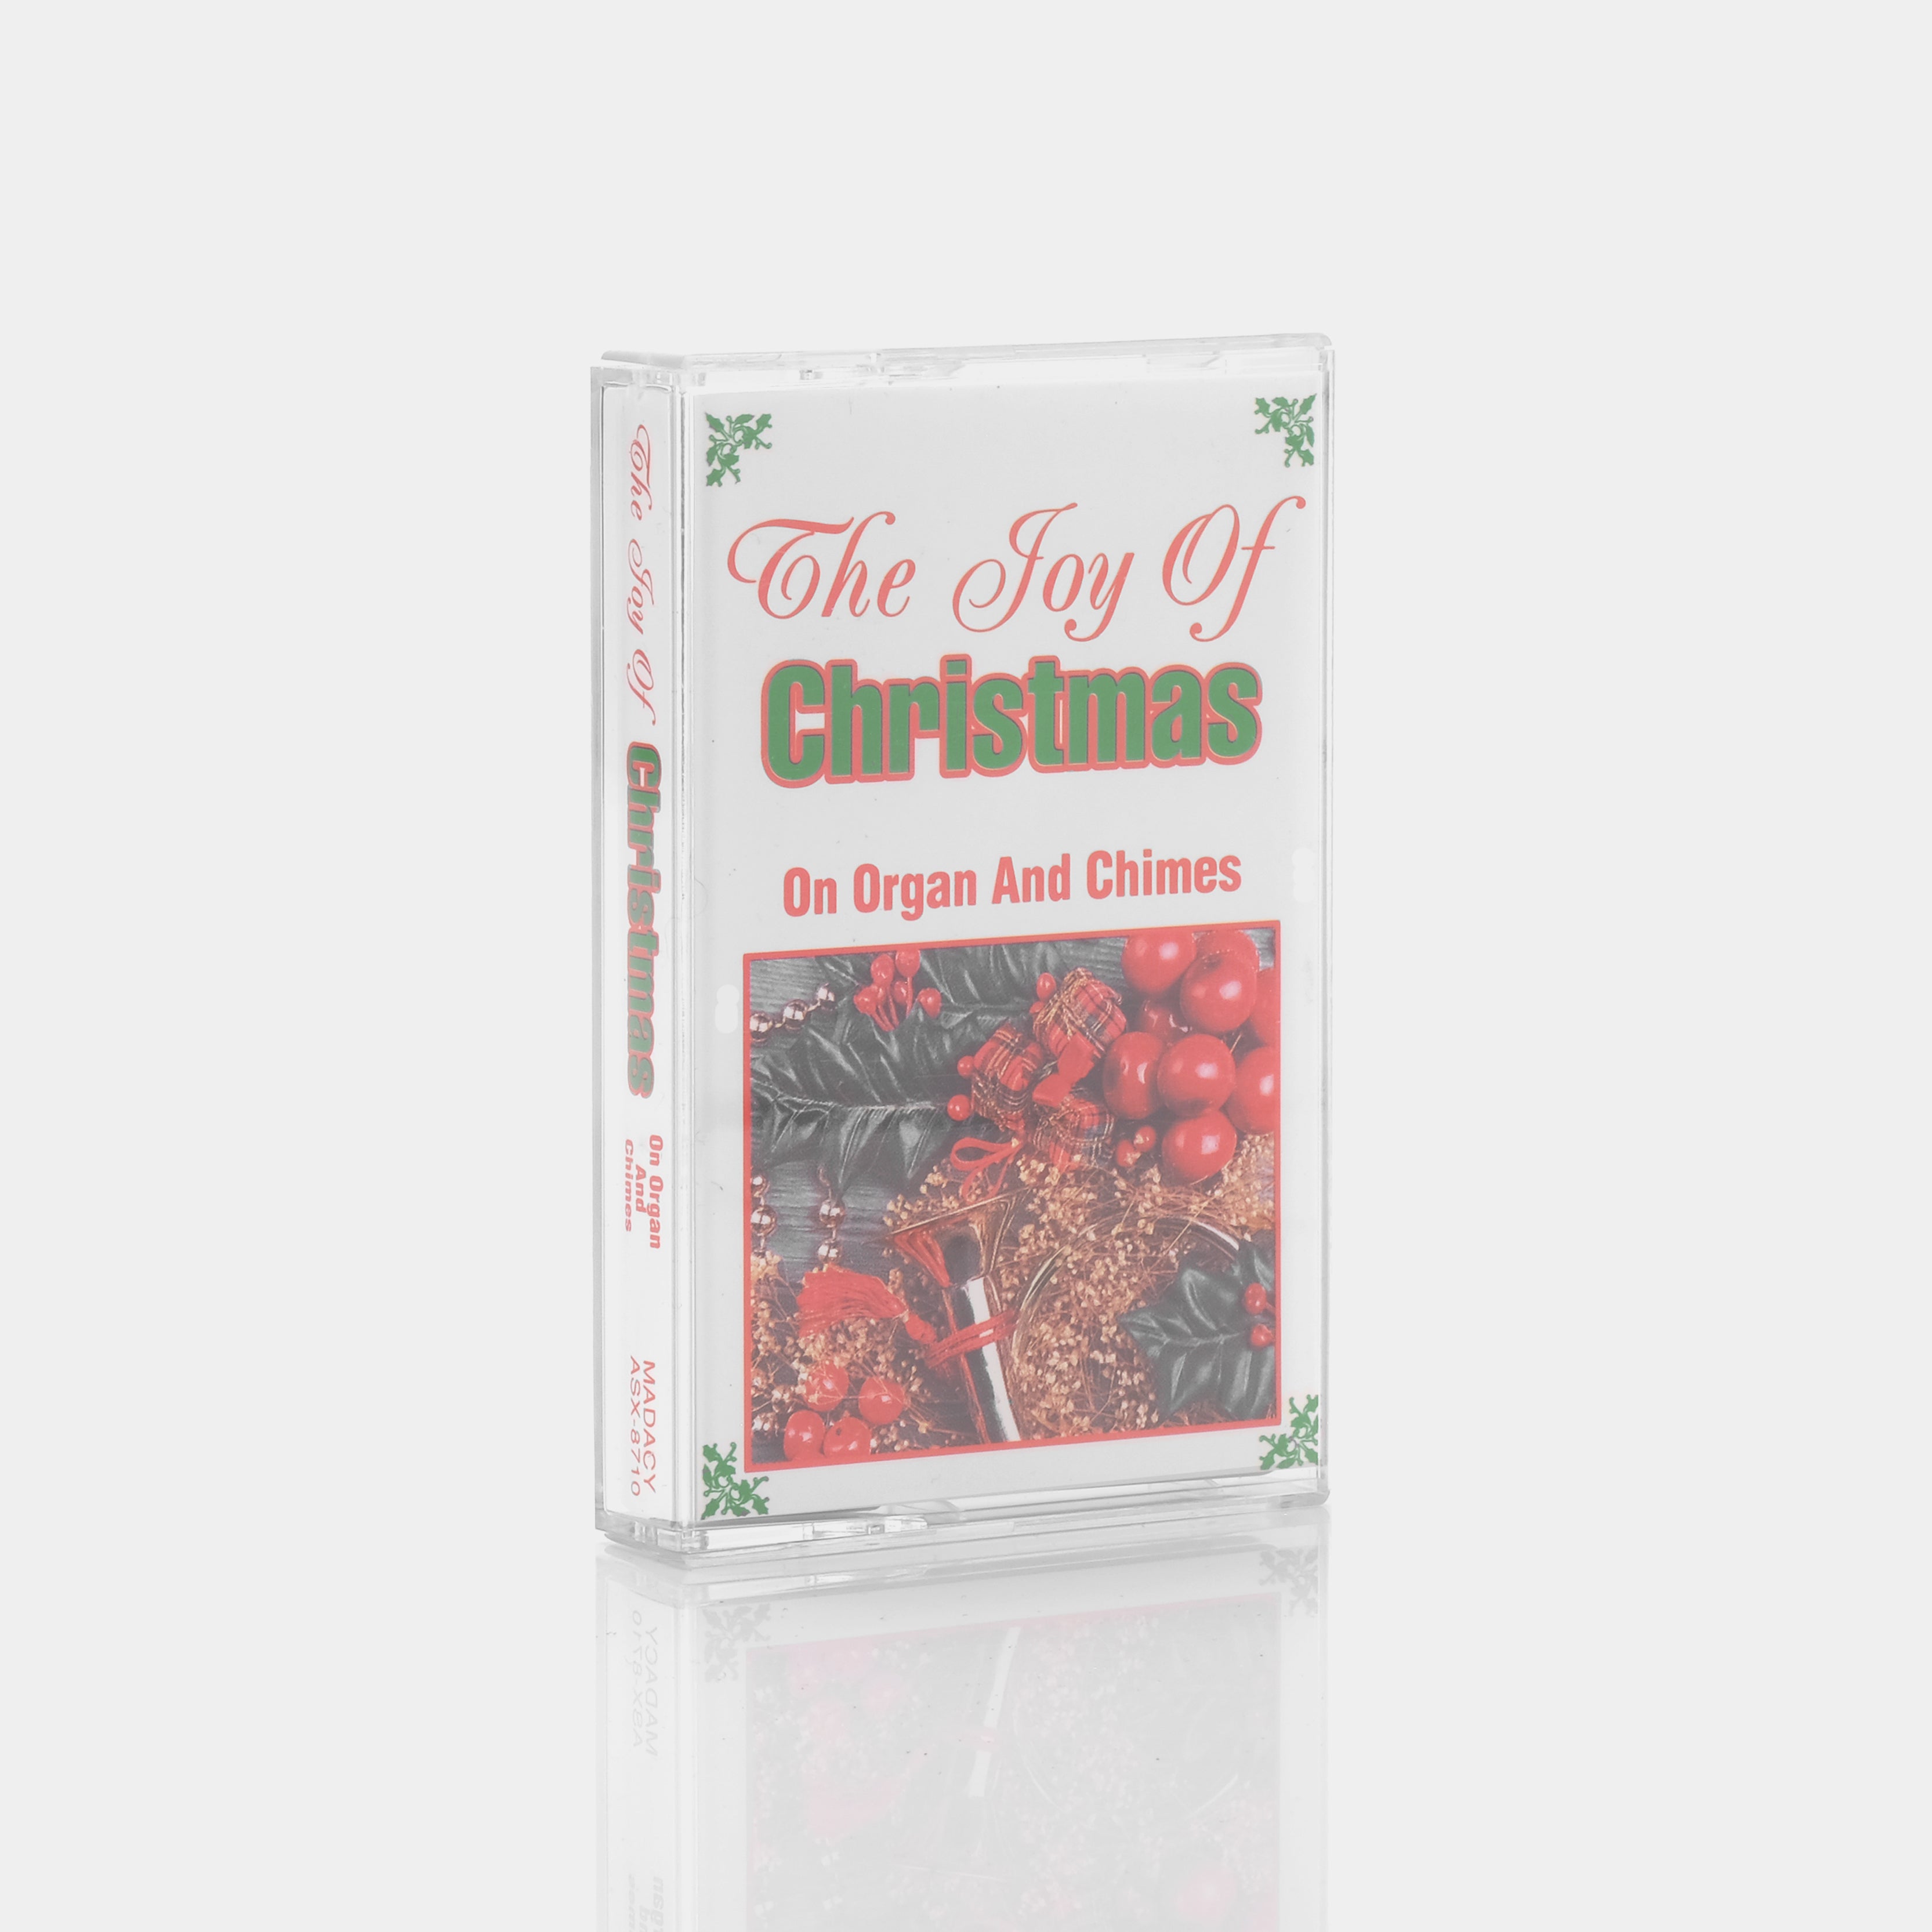 The Joy Of Christmas - On Organ And Chimes Cassette Tape